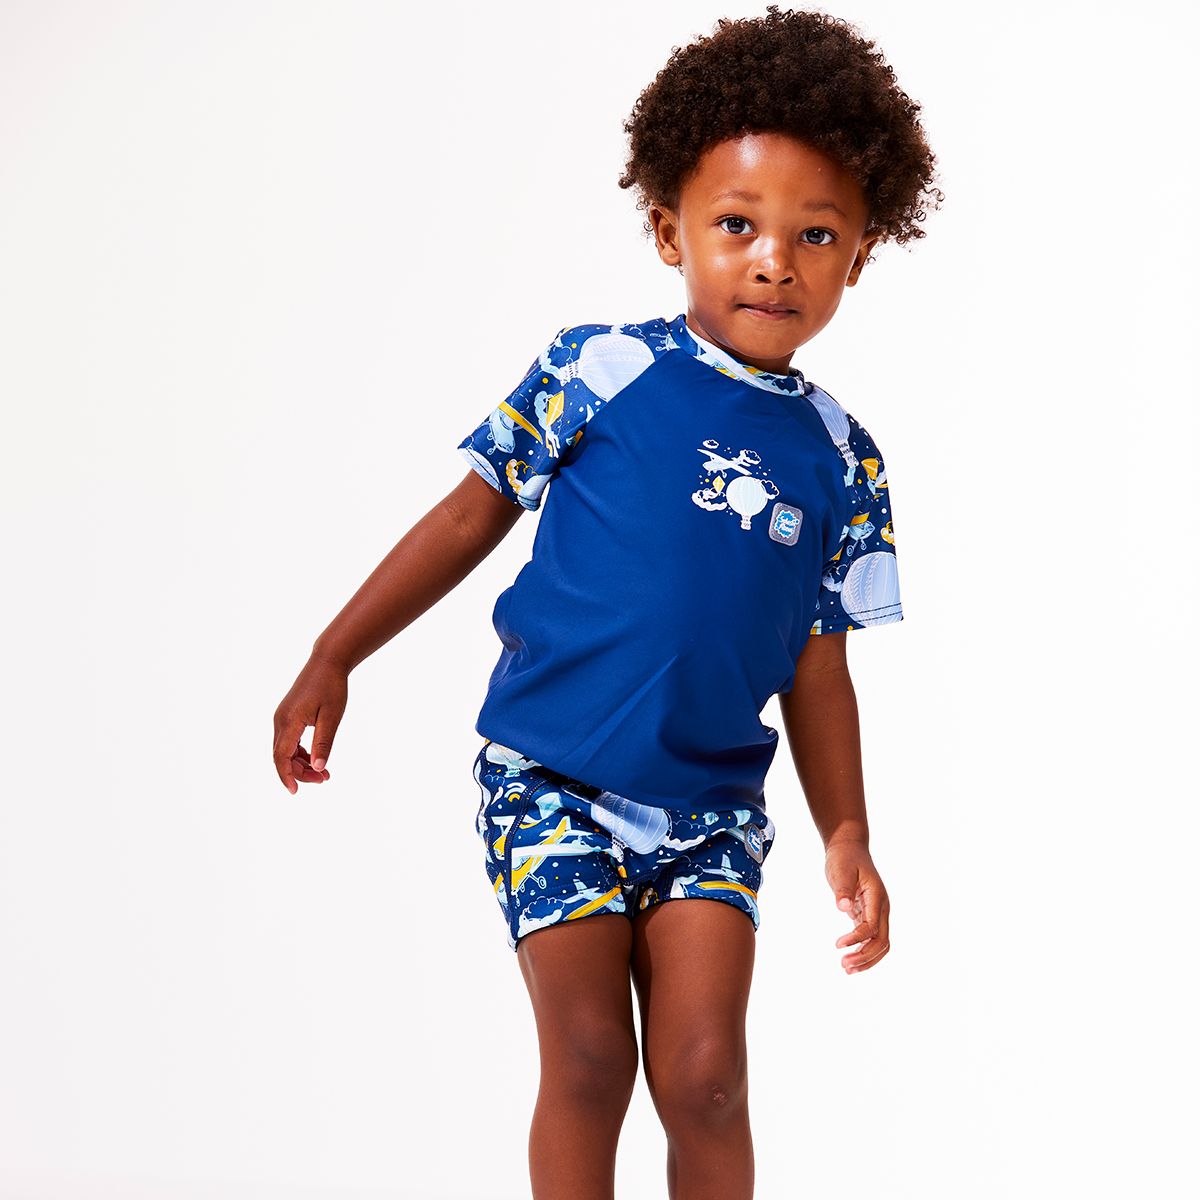 Lifestyle image of toddler wearing UV protective short sleeve rash top in navy blue, and sky themed print on the chest and sleeves. He's also wearing matching swim shorts or jammers.